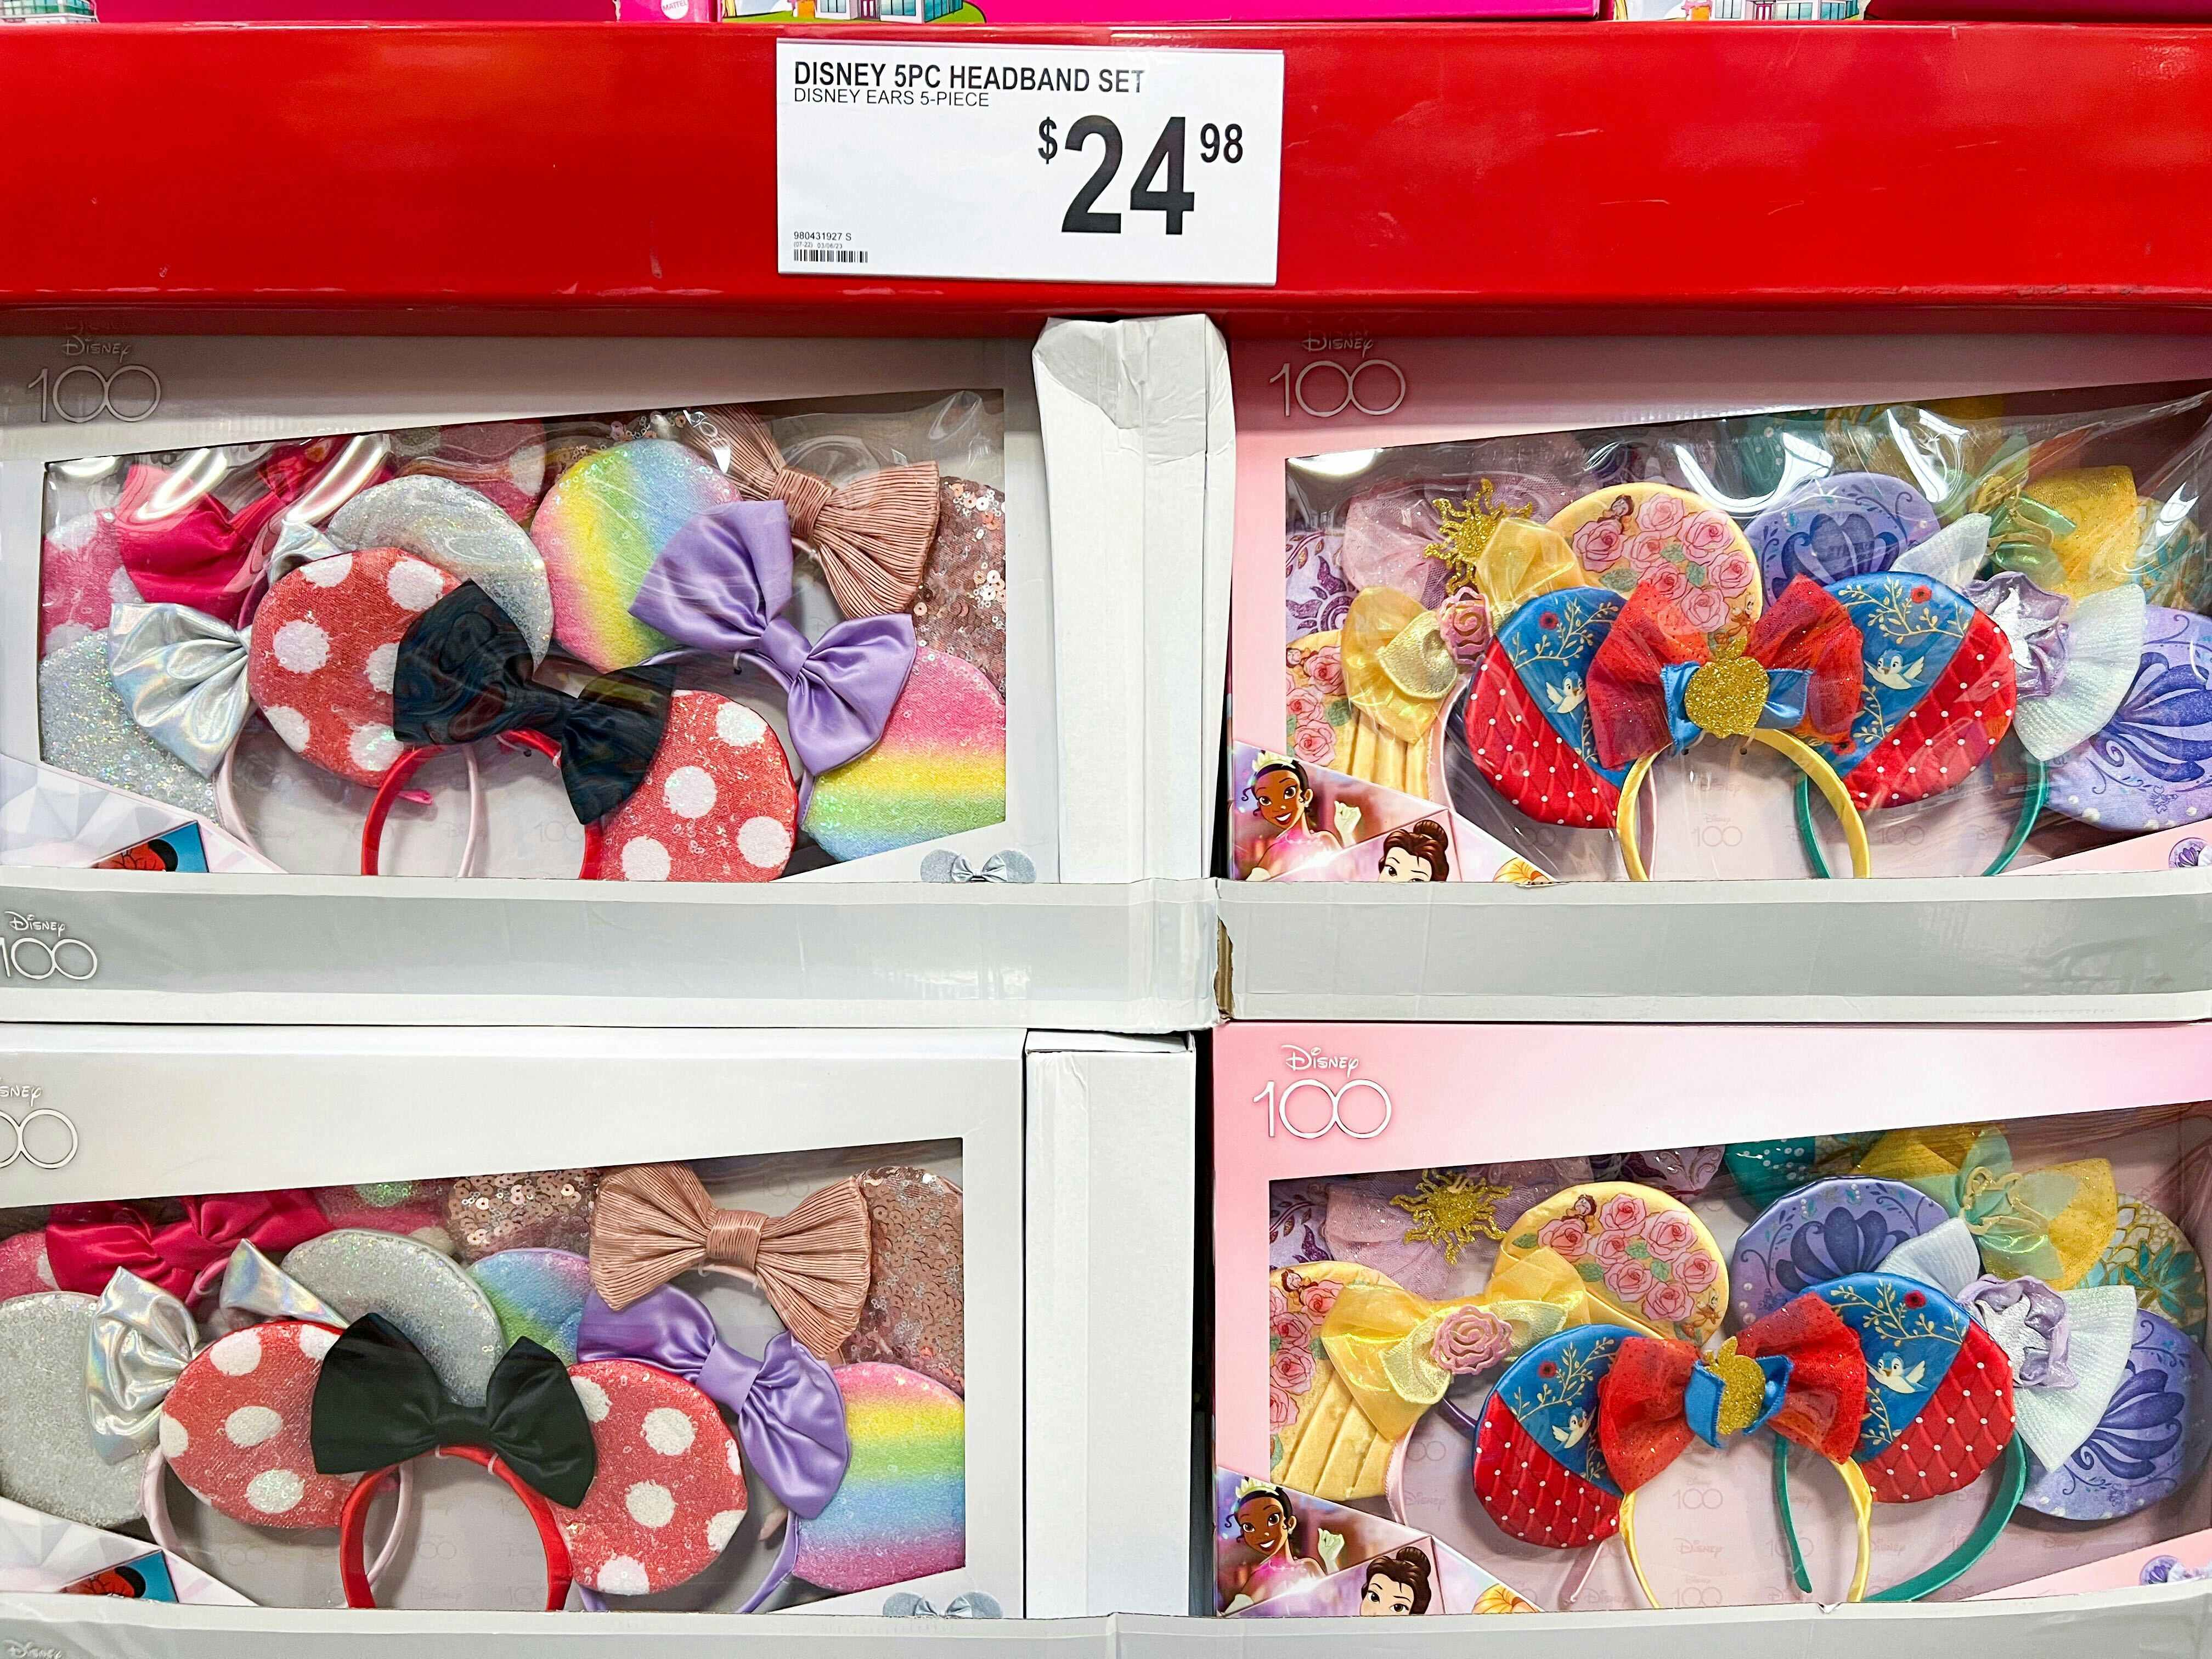 Boxes of Disney mouse ears stocked at Sam's Club